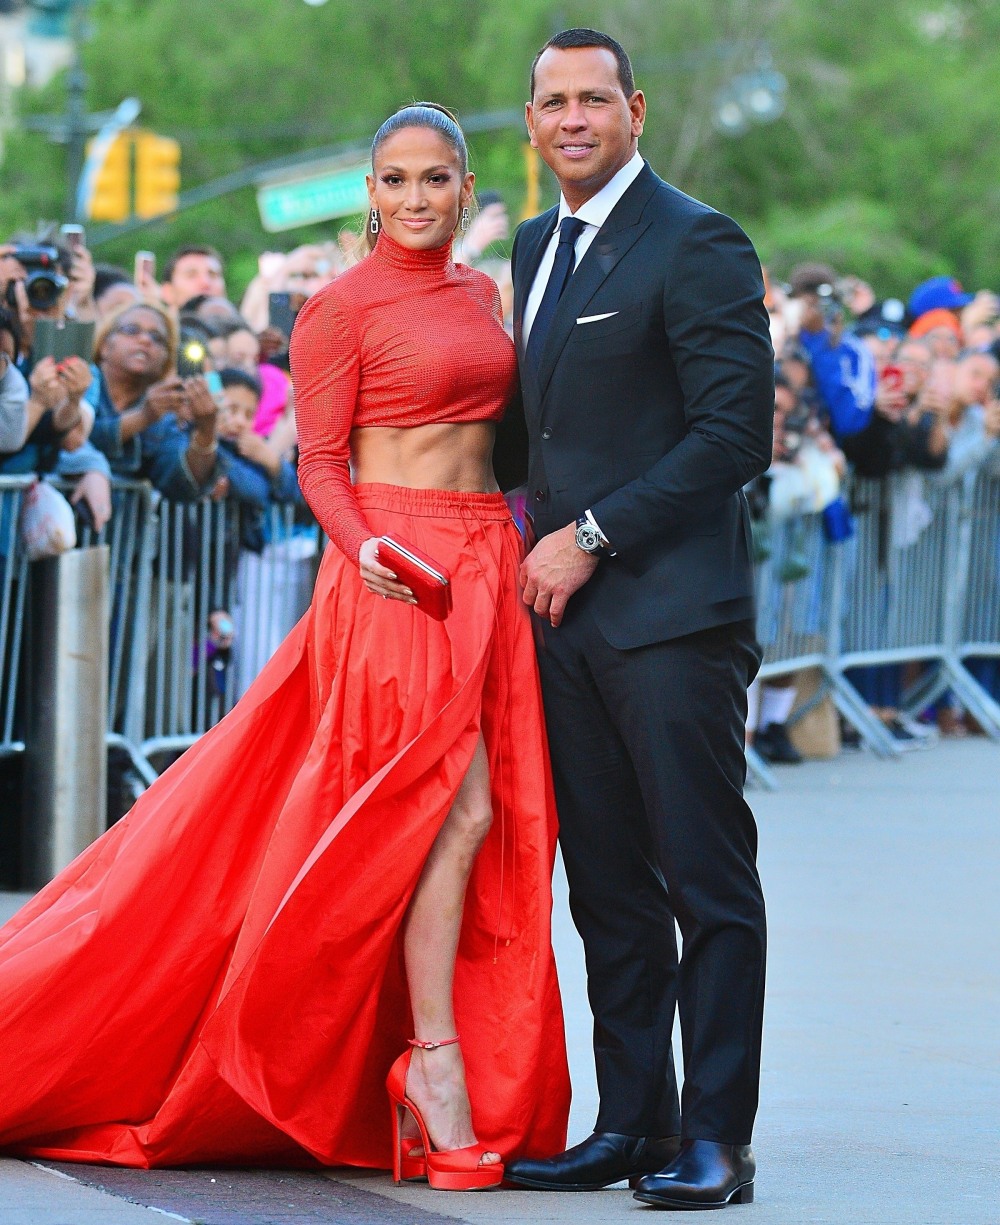 Jennifer Lopez and Alex Rodriguez are all smiles as they arrive to the 2019 CFDA Awards in NYC